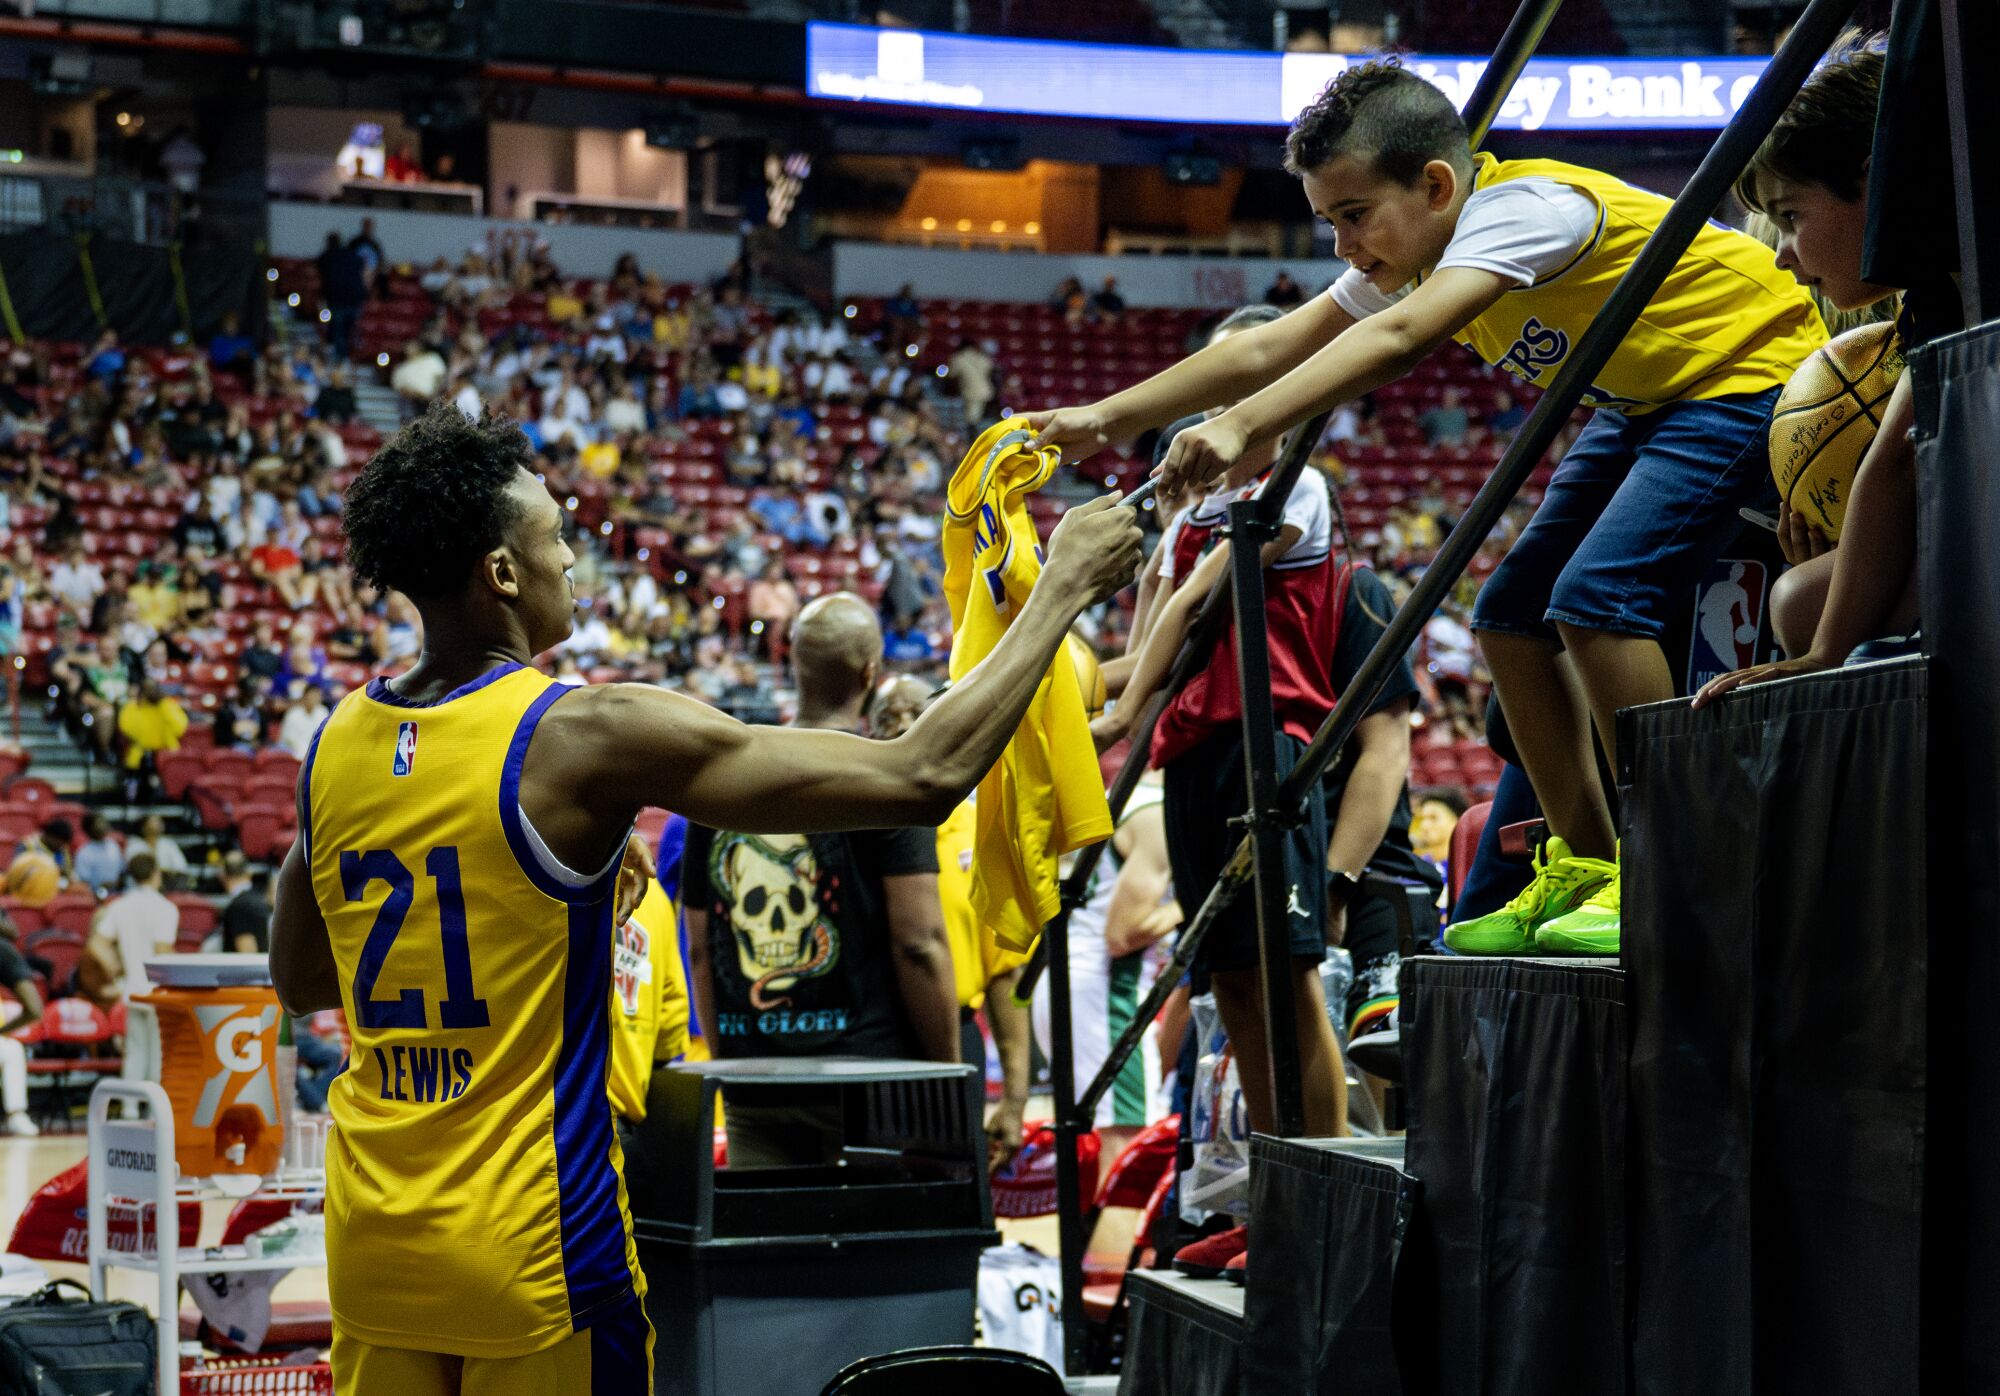 Maxwell Lewis signs an autograph for a young Lakers fan during an NBA Summer League game.